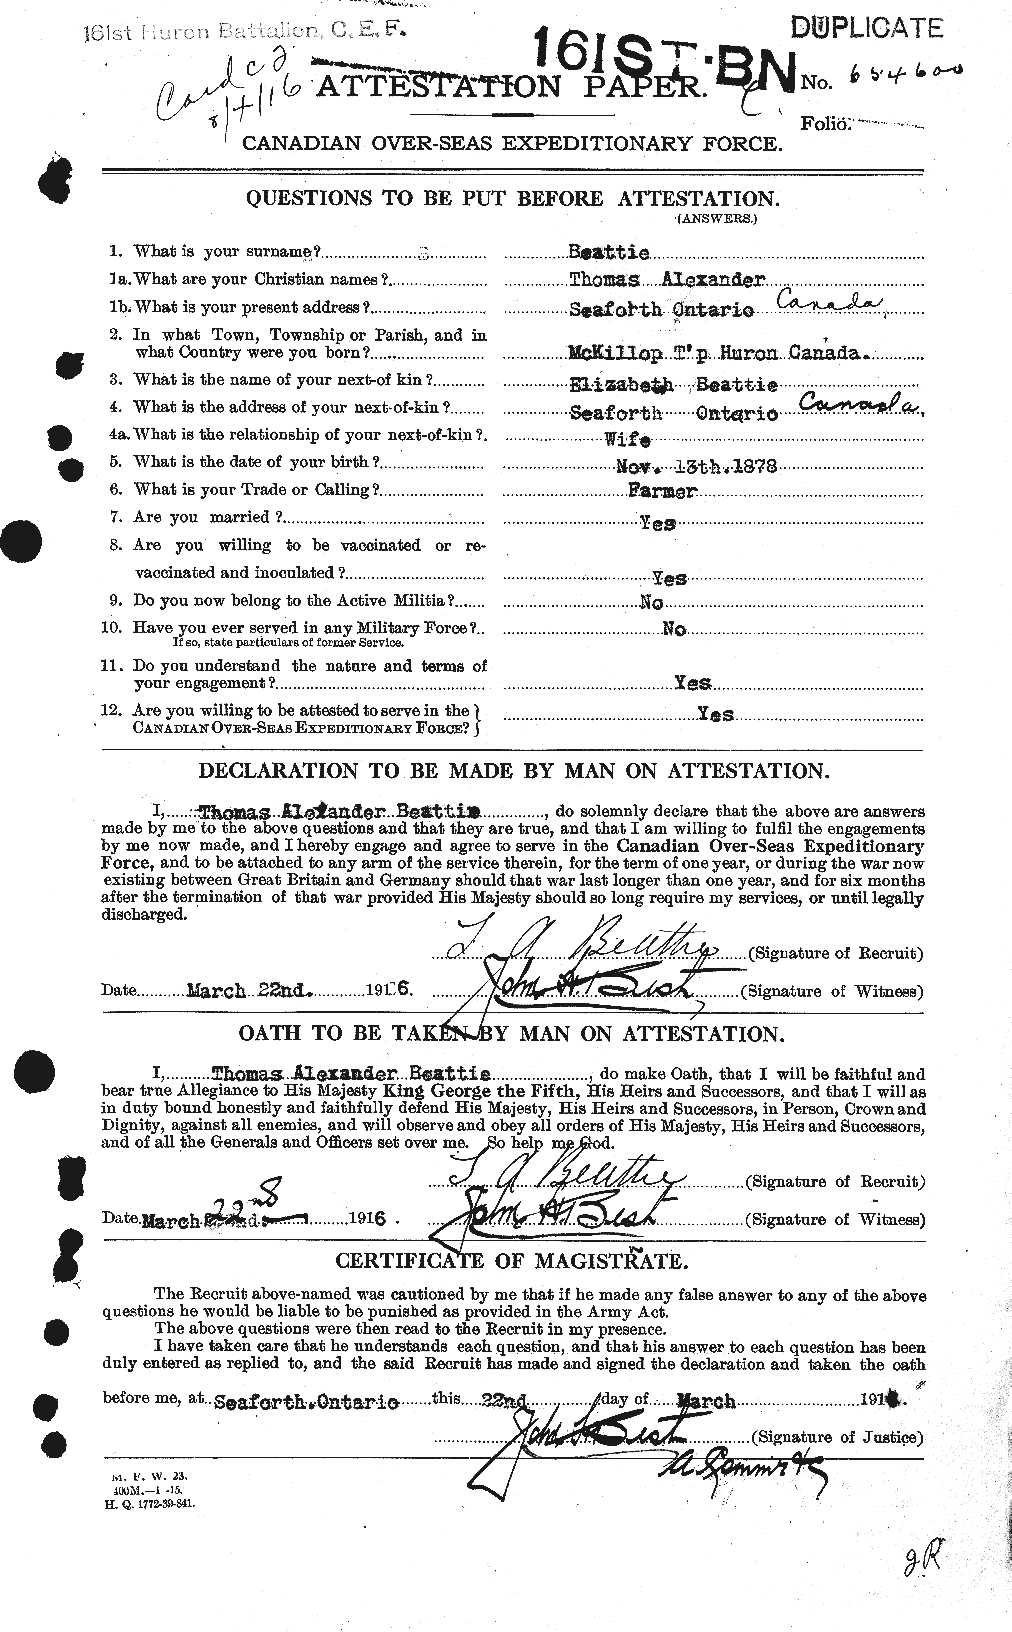 Personnel Records of the First World War - CEF 230804a